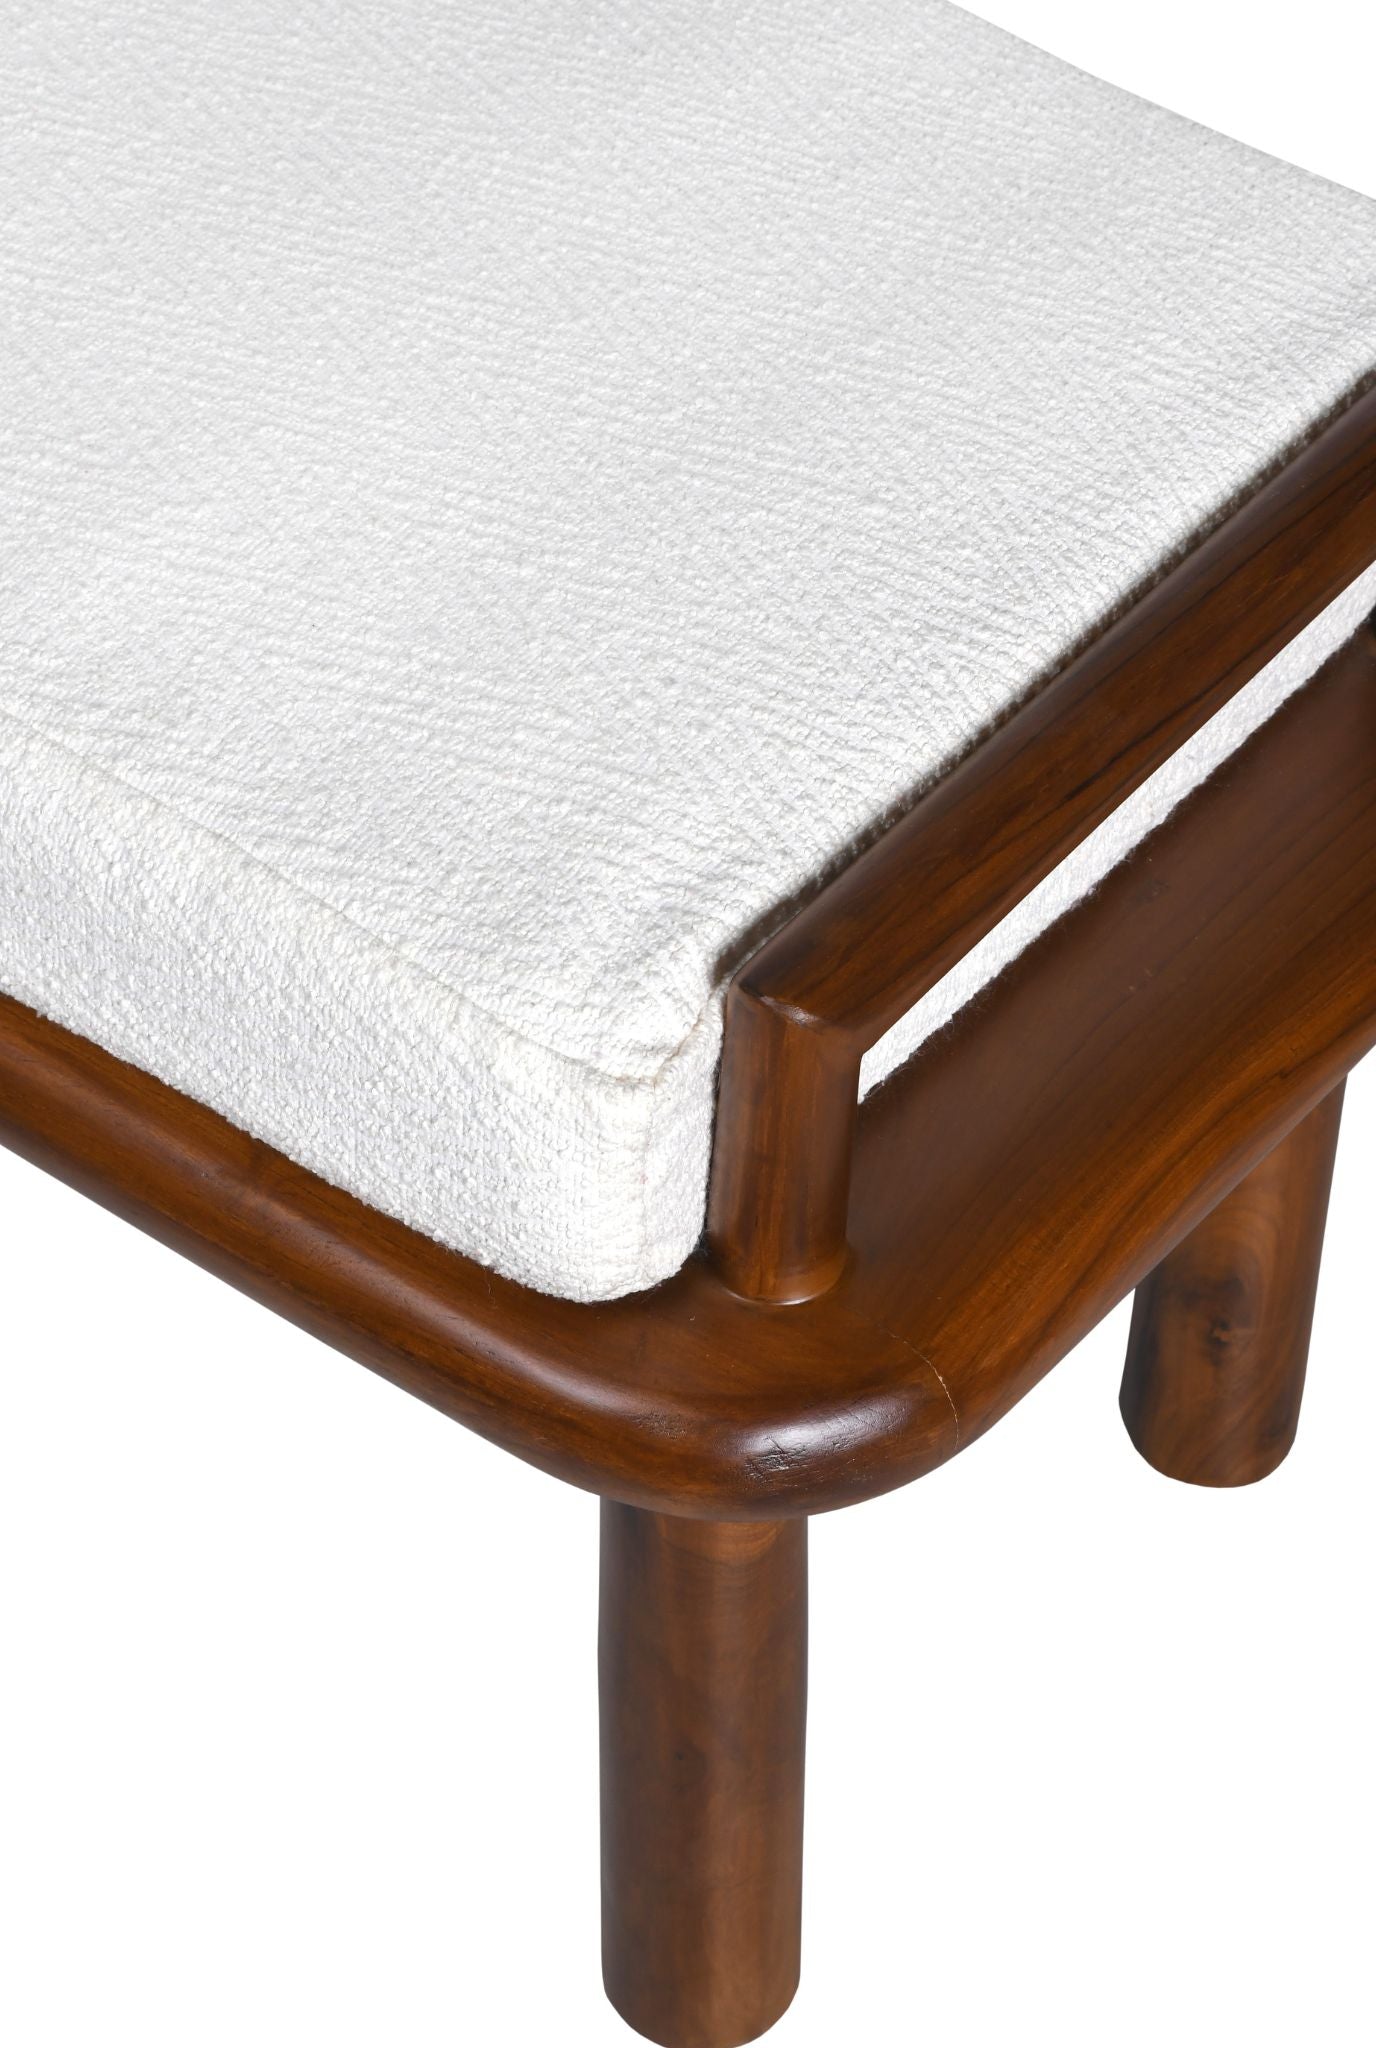 Asiago Teakwood Upholstered Bench (SHIPPING ONLY IN INDIA)